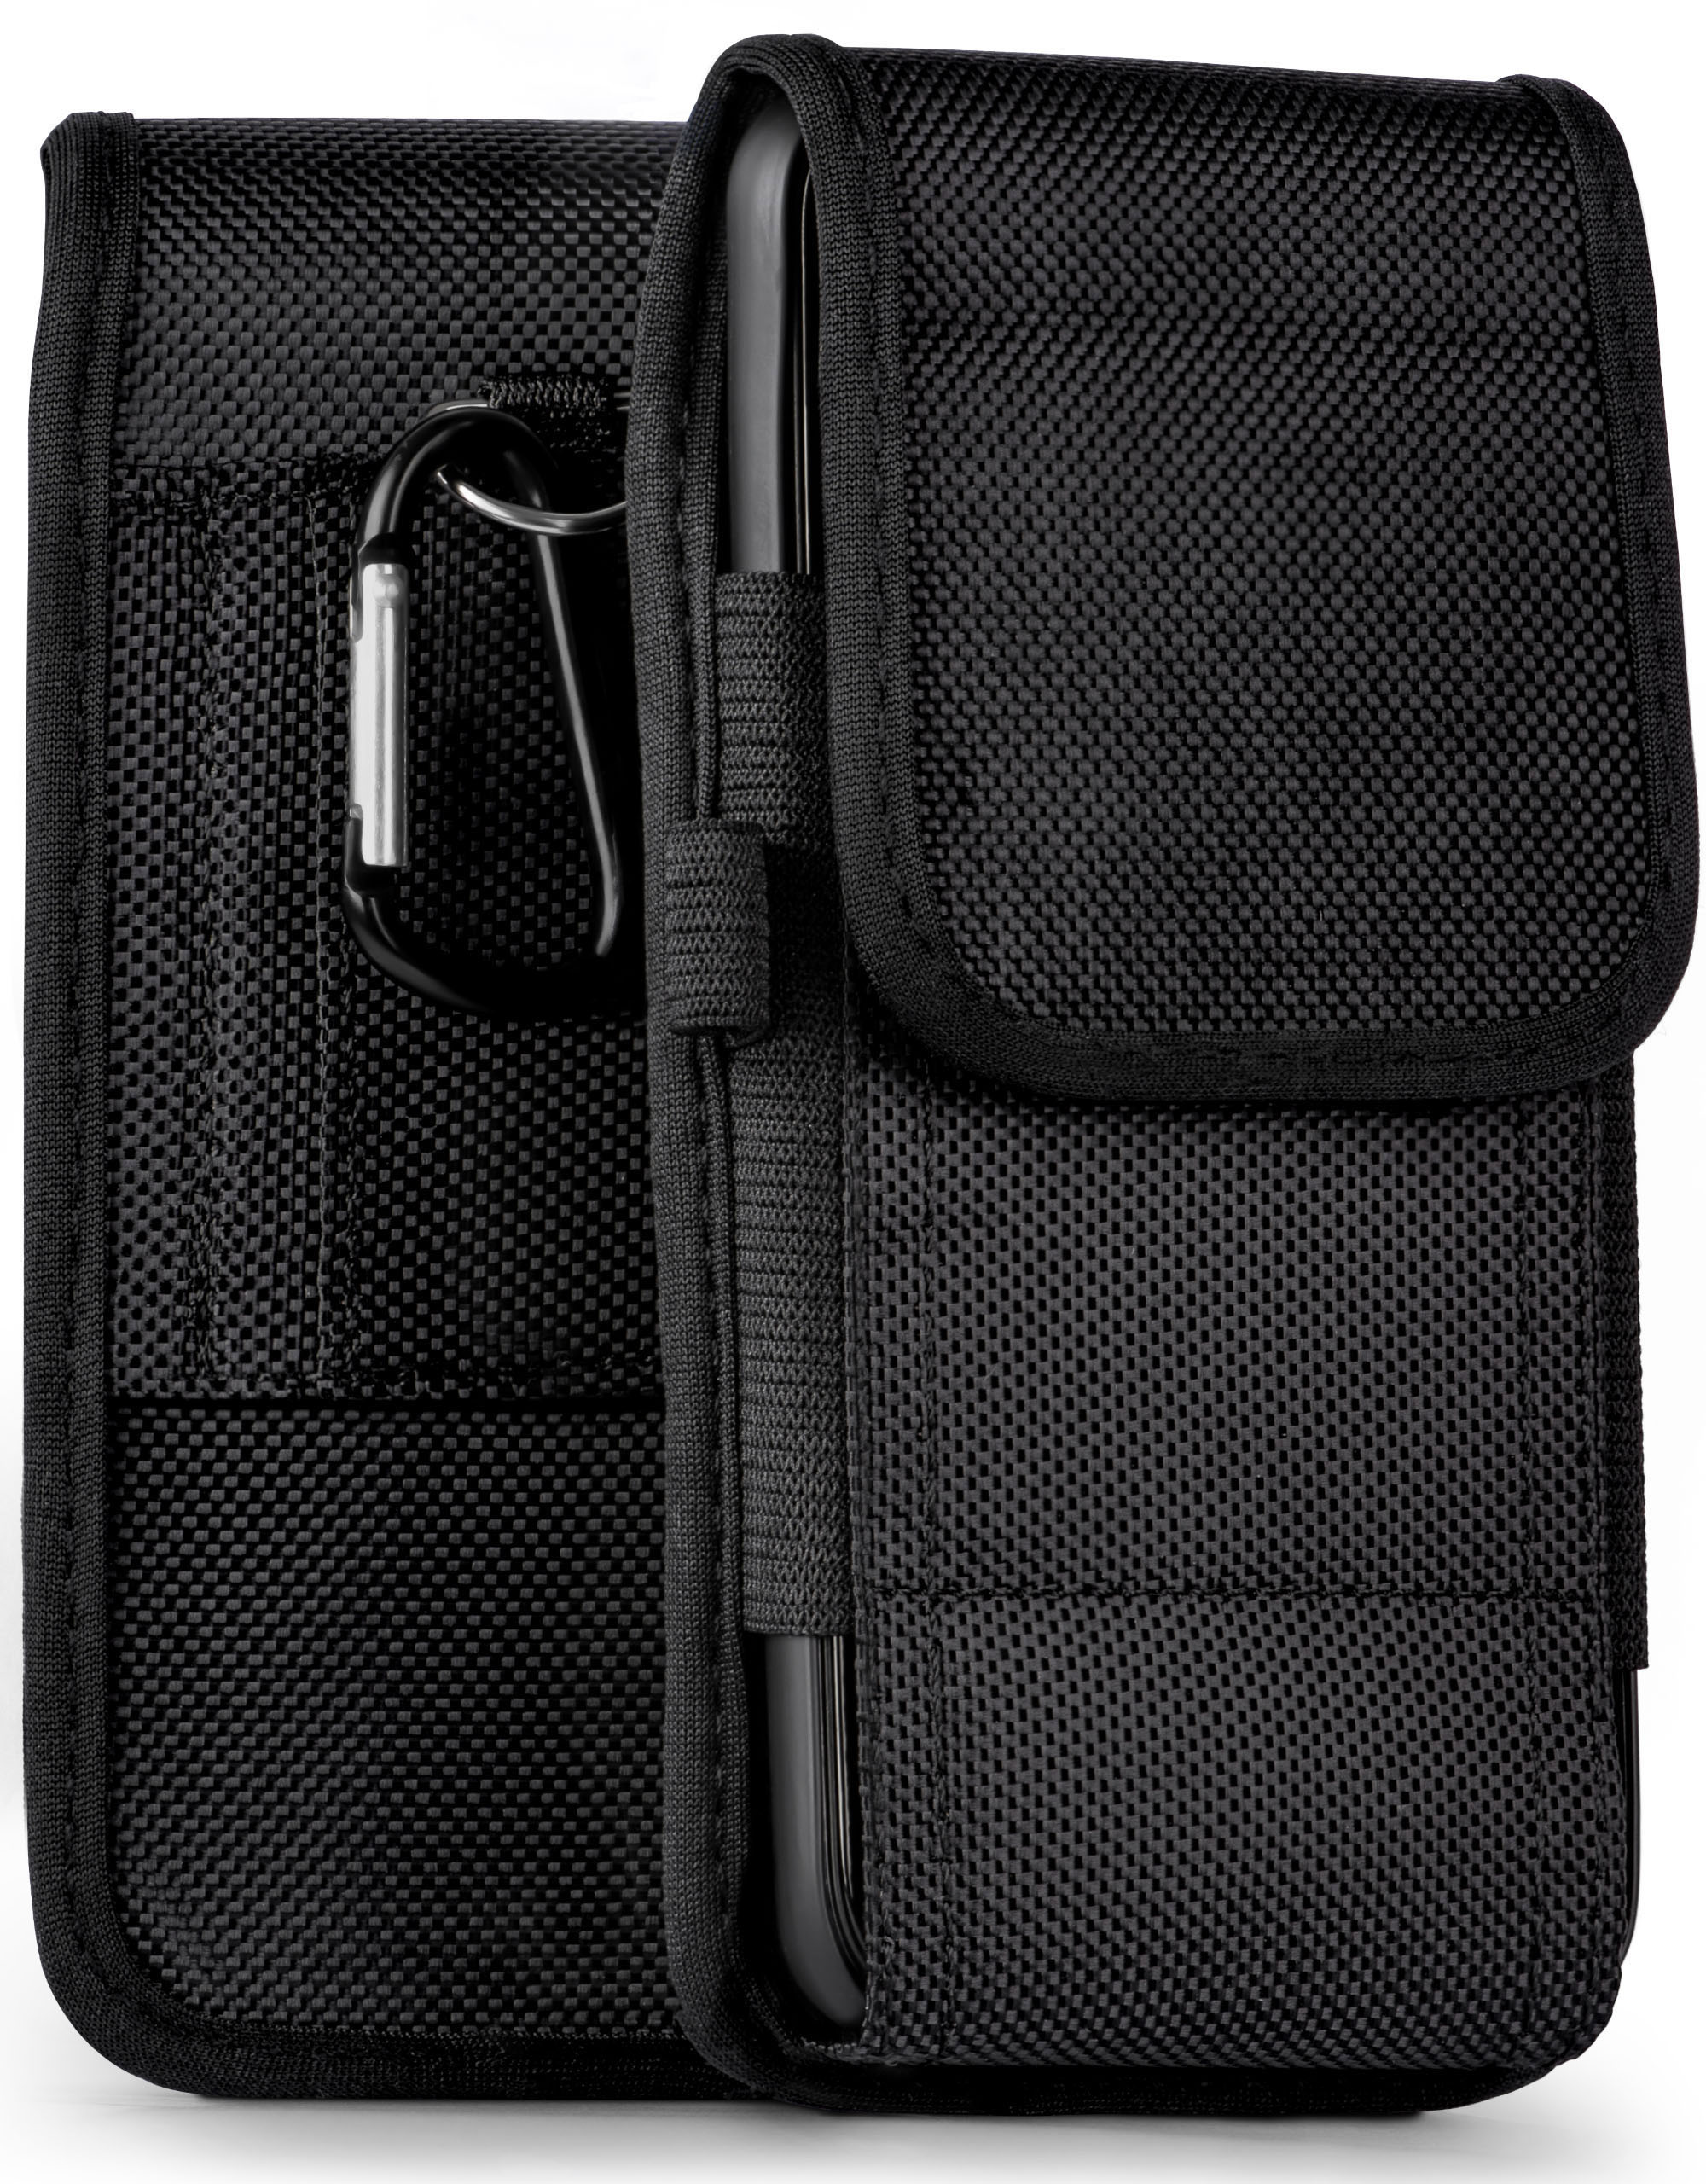 Aquos Sharp, Case, MOEX Trail C10, Holster, Agility